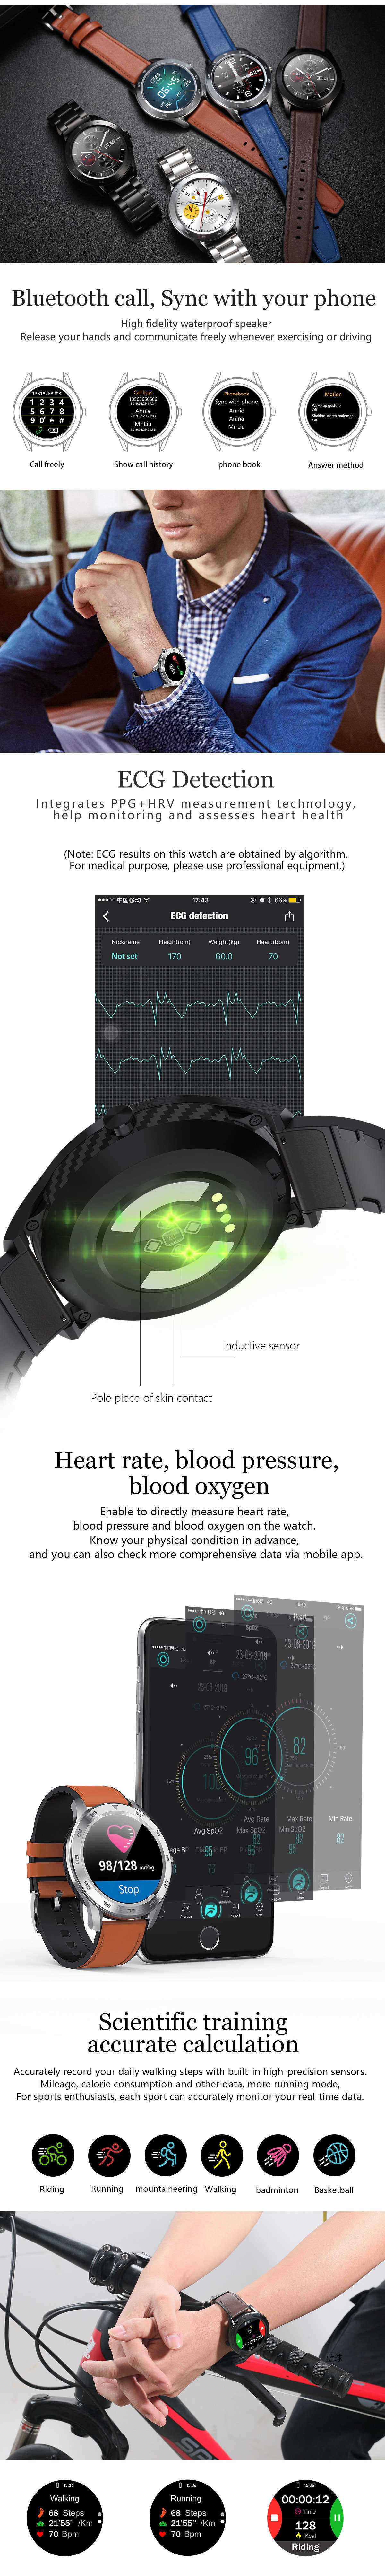 DT-NO1-DT98-Full-Round-HD-Screen-Wristband-bluetooth-Call-ECG-Heart-Rate-O2-Monitor-Smart-Watch-1559187